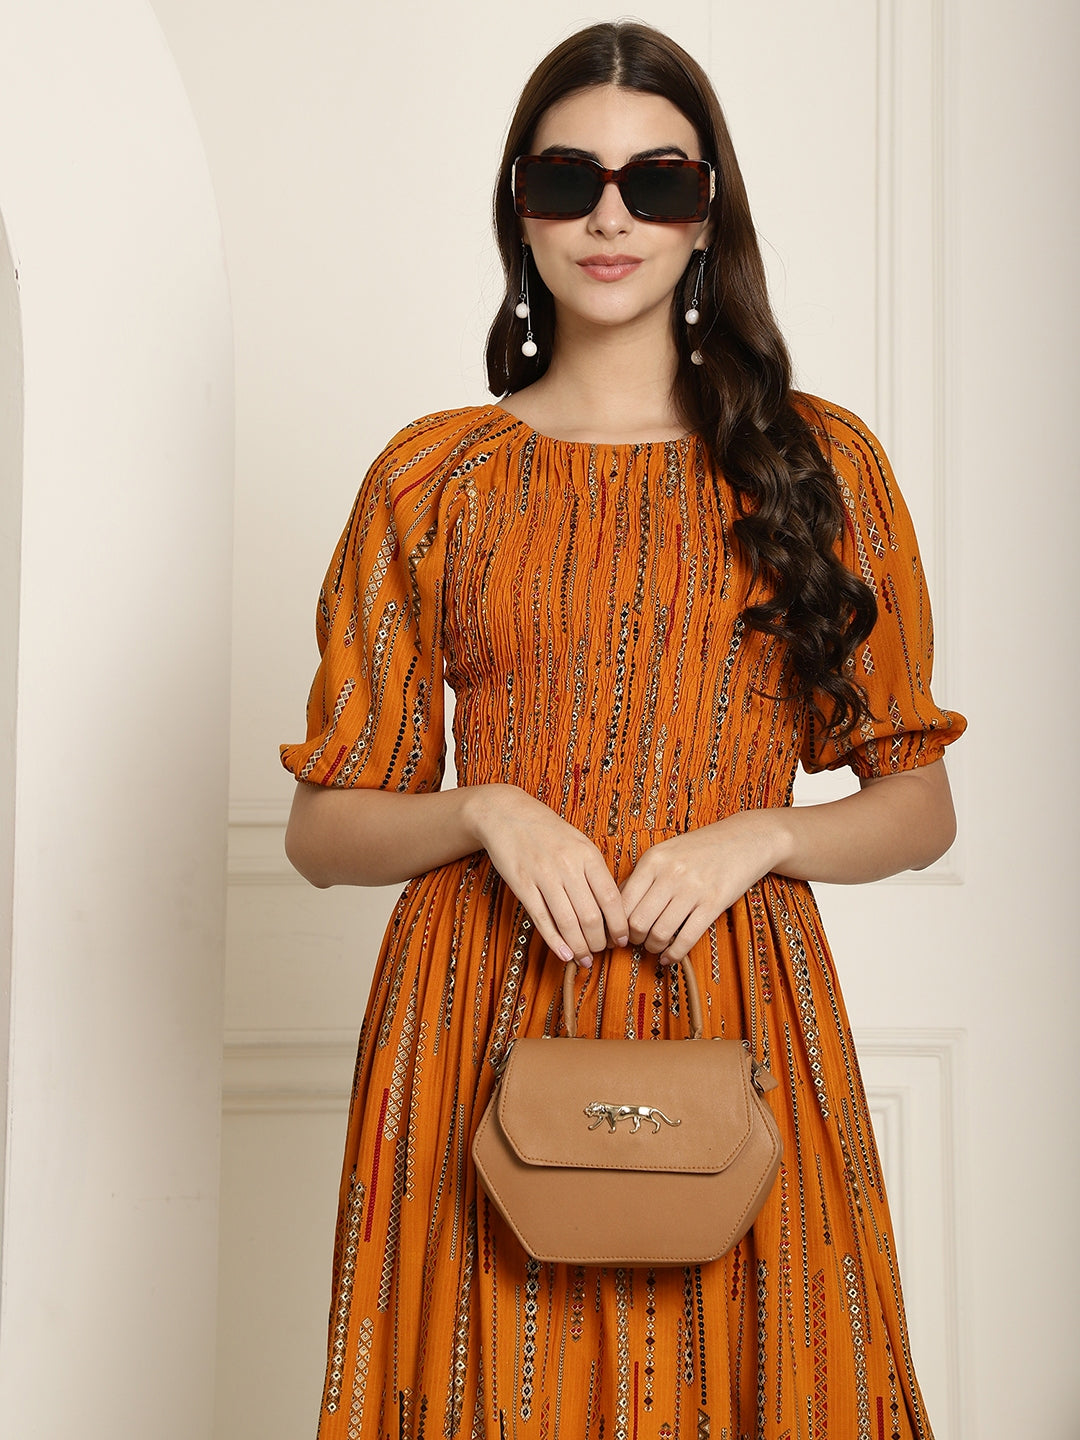 Aawari Mustard Printed A-Line Midi Dress With Extended Sleeves